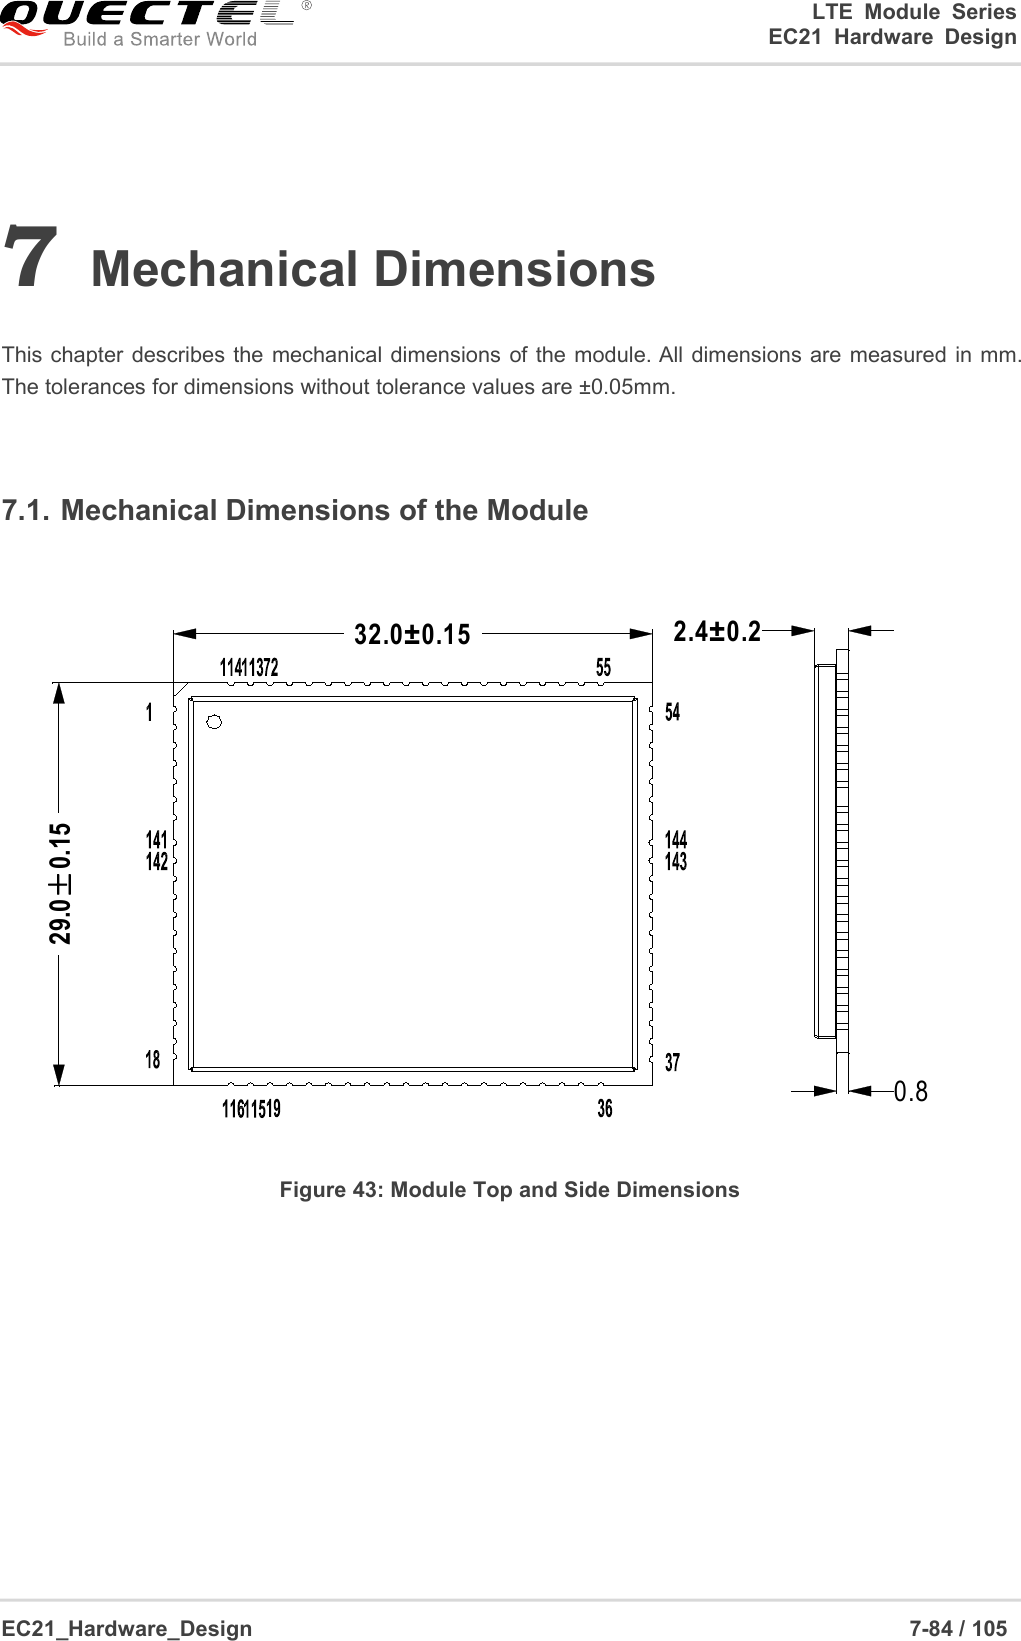 LTE Module SeriesEC21 Hardware DesignEC21_Hardware_Design 7-84 / 1057Mechanical DimensionsThis chapter describes the mechanical dimensions of the module. All dimensions are measured in mm.The tolerances for dimensions without tolerance values are ±0.05mm.7.1. Mechanical Dimensions of the Module32.0±0.1529.0±0.150.82.4±0.2Figure 43: Module Top and Side Dimensions